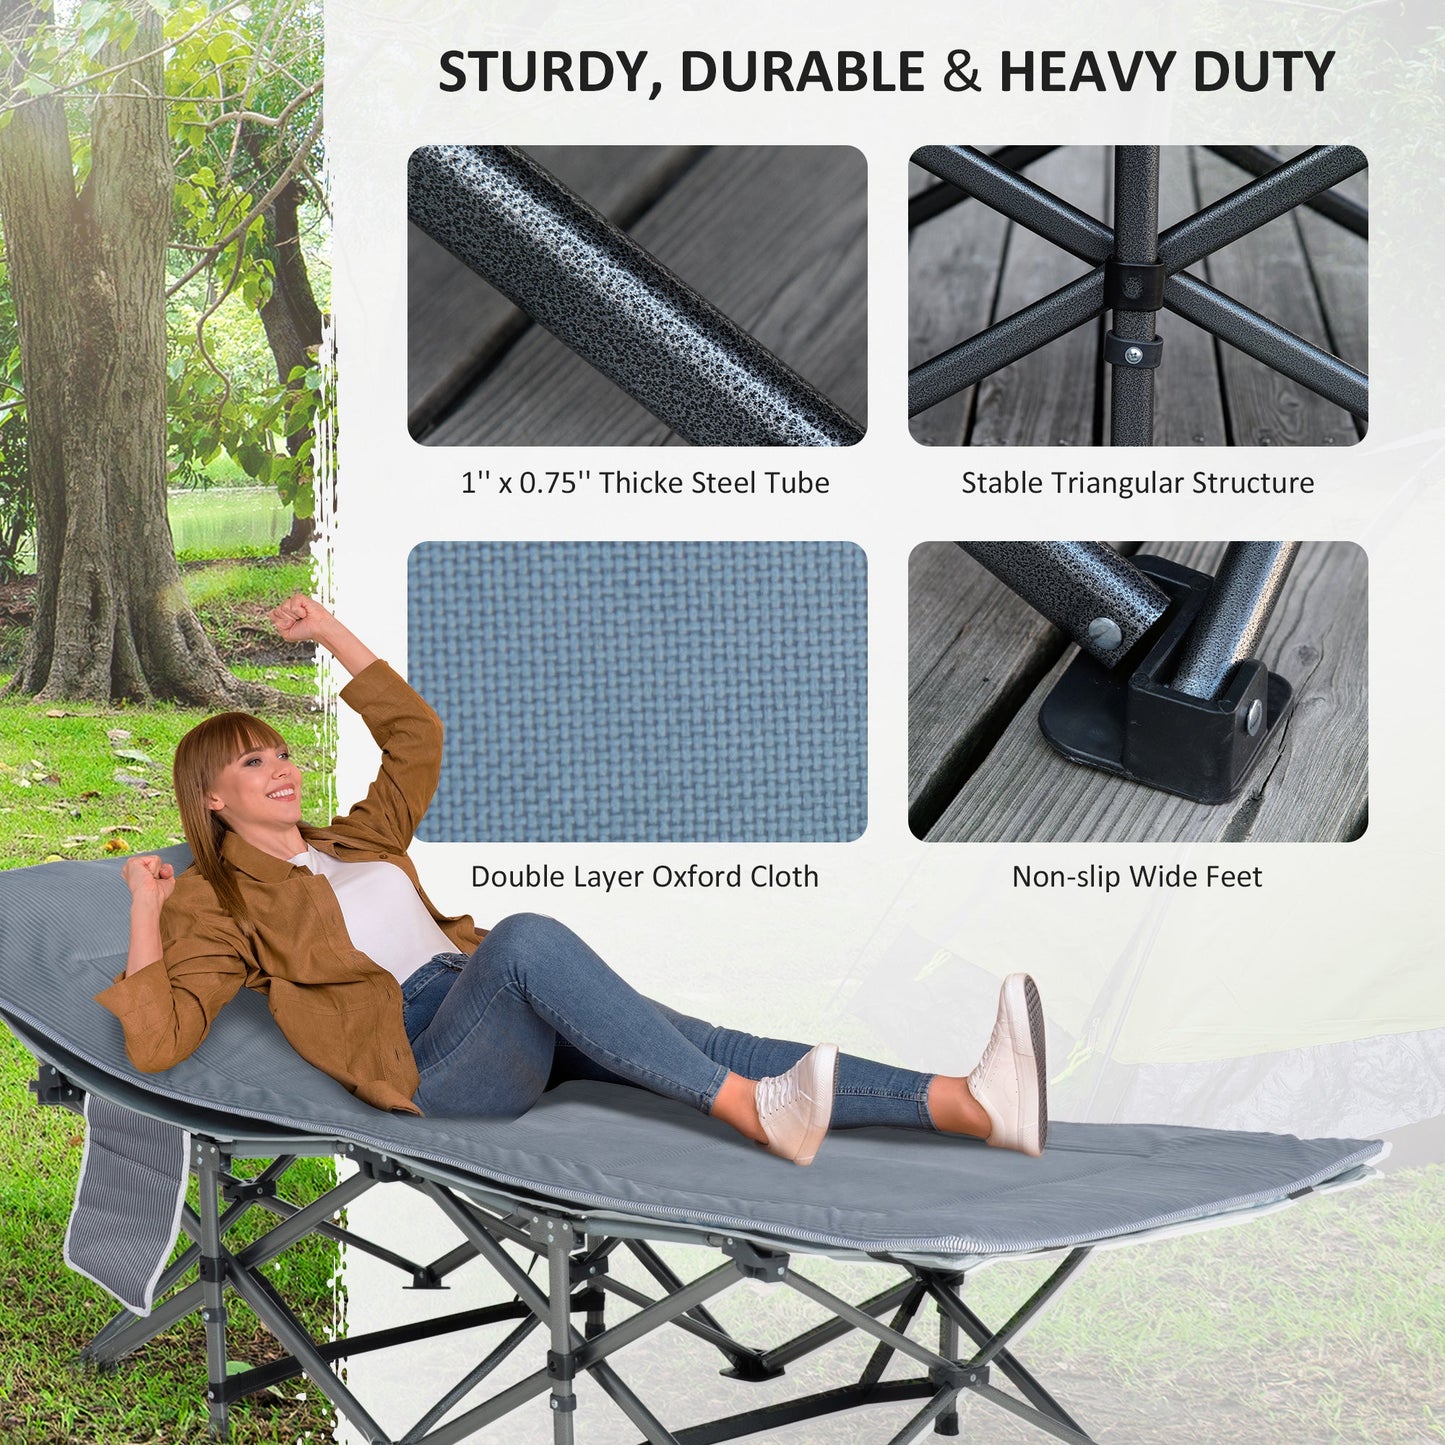 Outdoor and Garden-Heavy Duty 2 Person Camping Cot with Mattress for Adults With Portable Carrying Bag, Outdoor Folding Lightweight Sleeping Bed, Grey - Outdoor Style Company